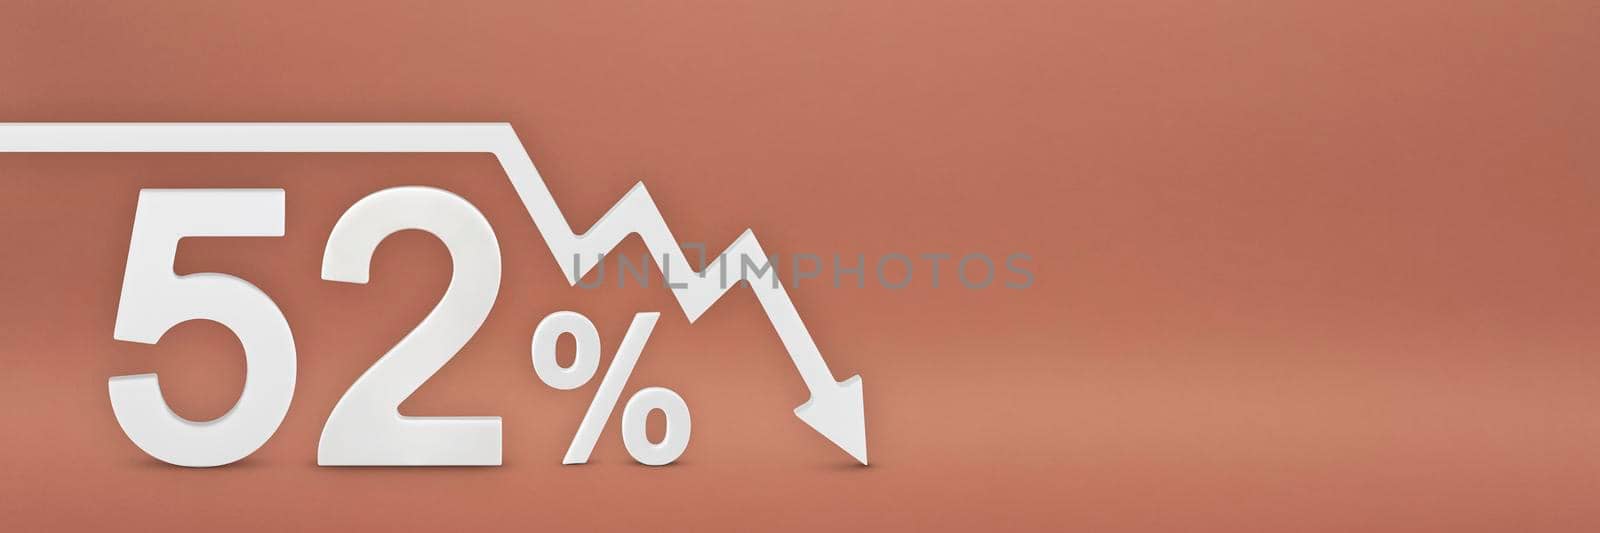 fifty-two percent, the arrow on the graph is pointing down. Stock market crash, bear market, inflation.Economic collapse, collapse of stocks.3d banner,52 percent discount sign on a red background. by SERSOL